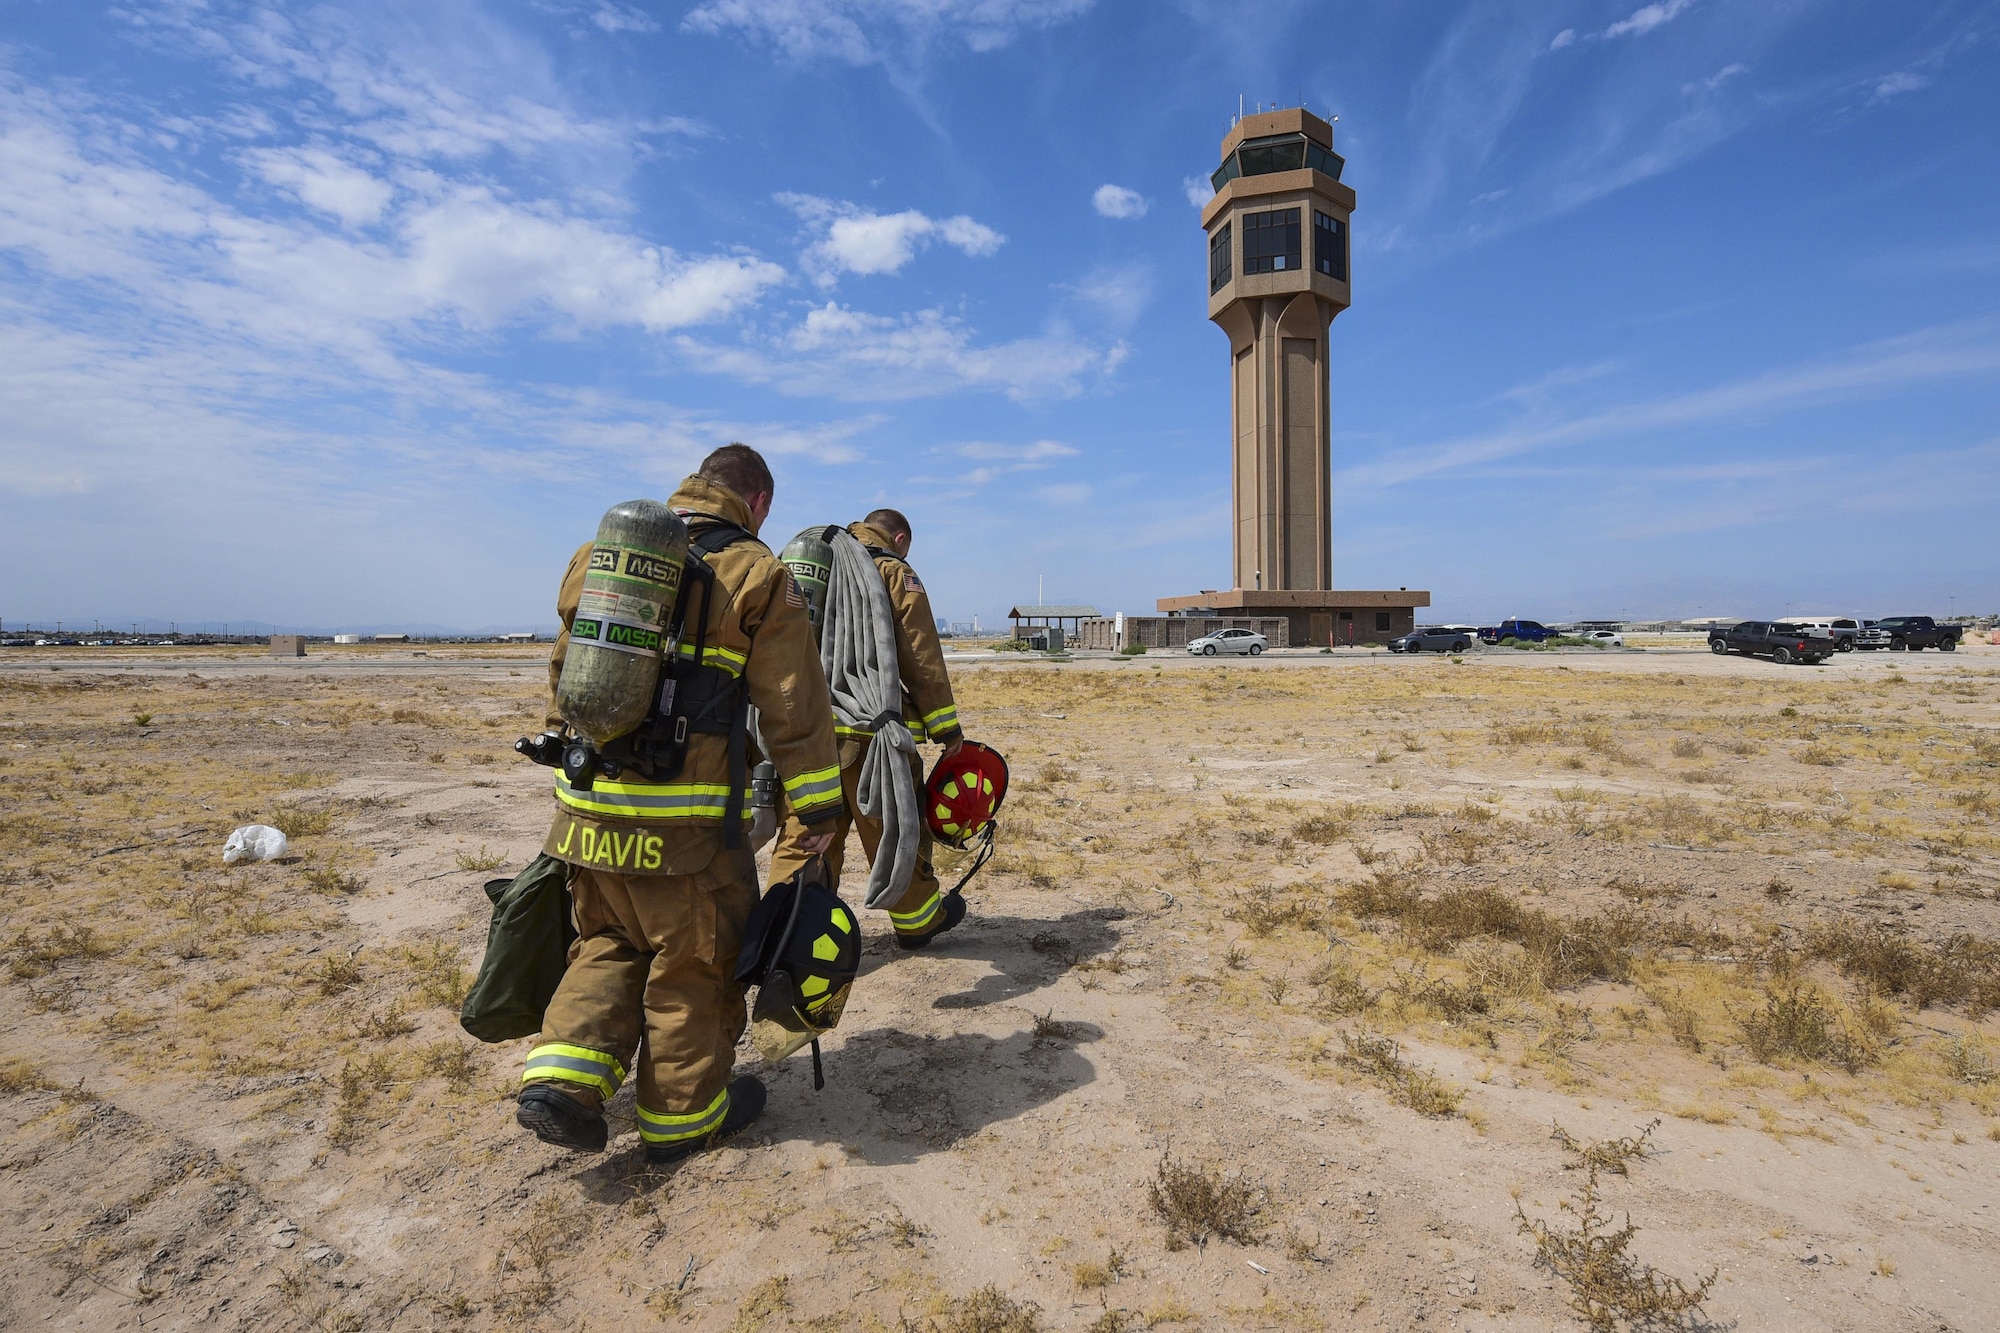 Senior Airman Jordan Davis, 99th Civil Engineer Squadron engine operator, and Staff Sgt. Blaine Erway, 99th CES firefighter crew chief, walk to the air traffic control tower at Nellis Air Force Base, Nev., July 18, 2017. The team climbed the 10 stories to simulate responding to a medical or electrical fire emergency at the top of the tower.